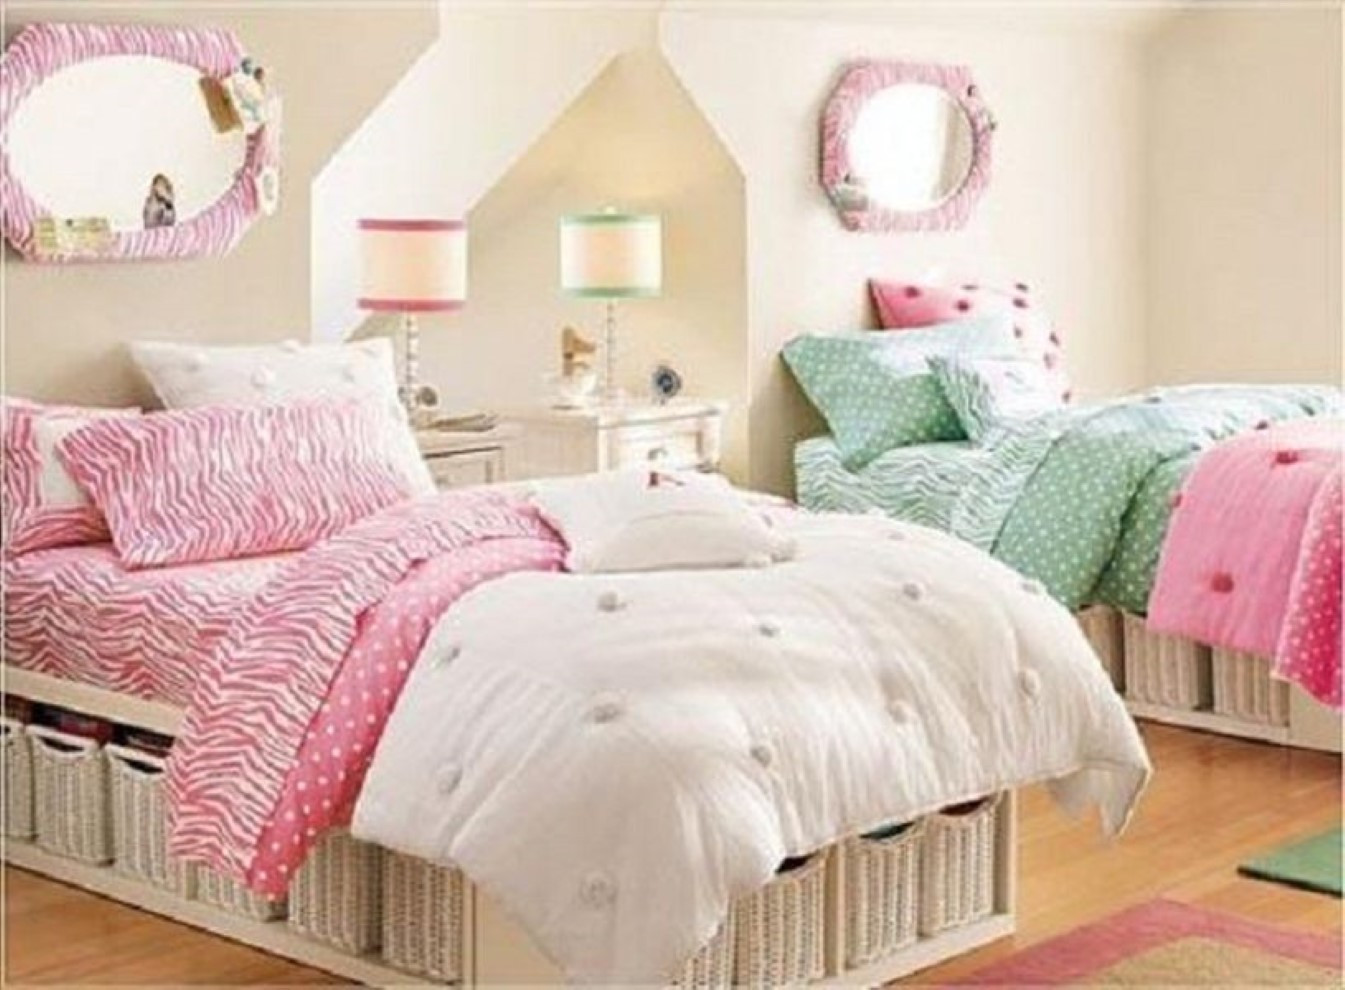 Girls Bedroom Set Twin
 Twin Bedroom Sets Ideas for Your Amazing and Creative Twin